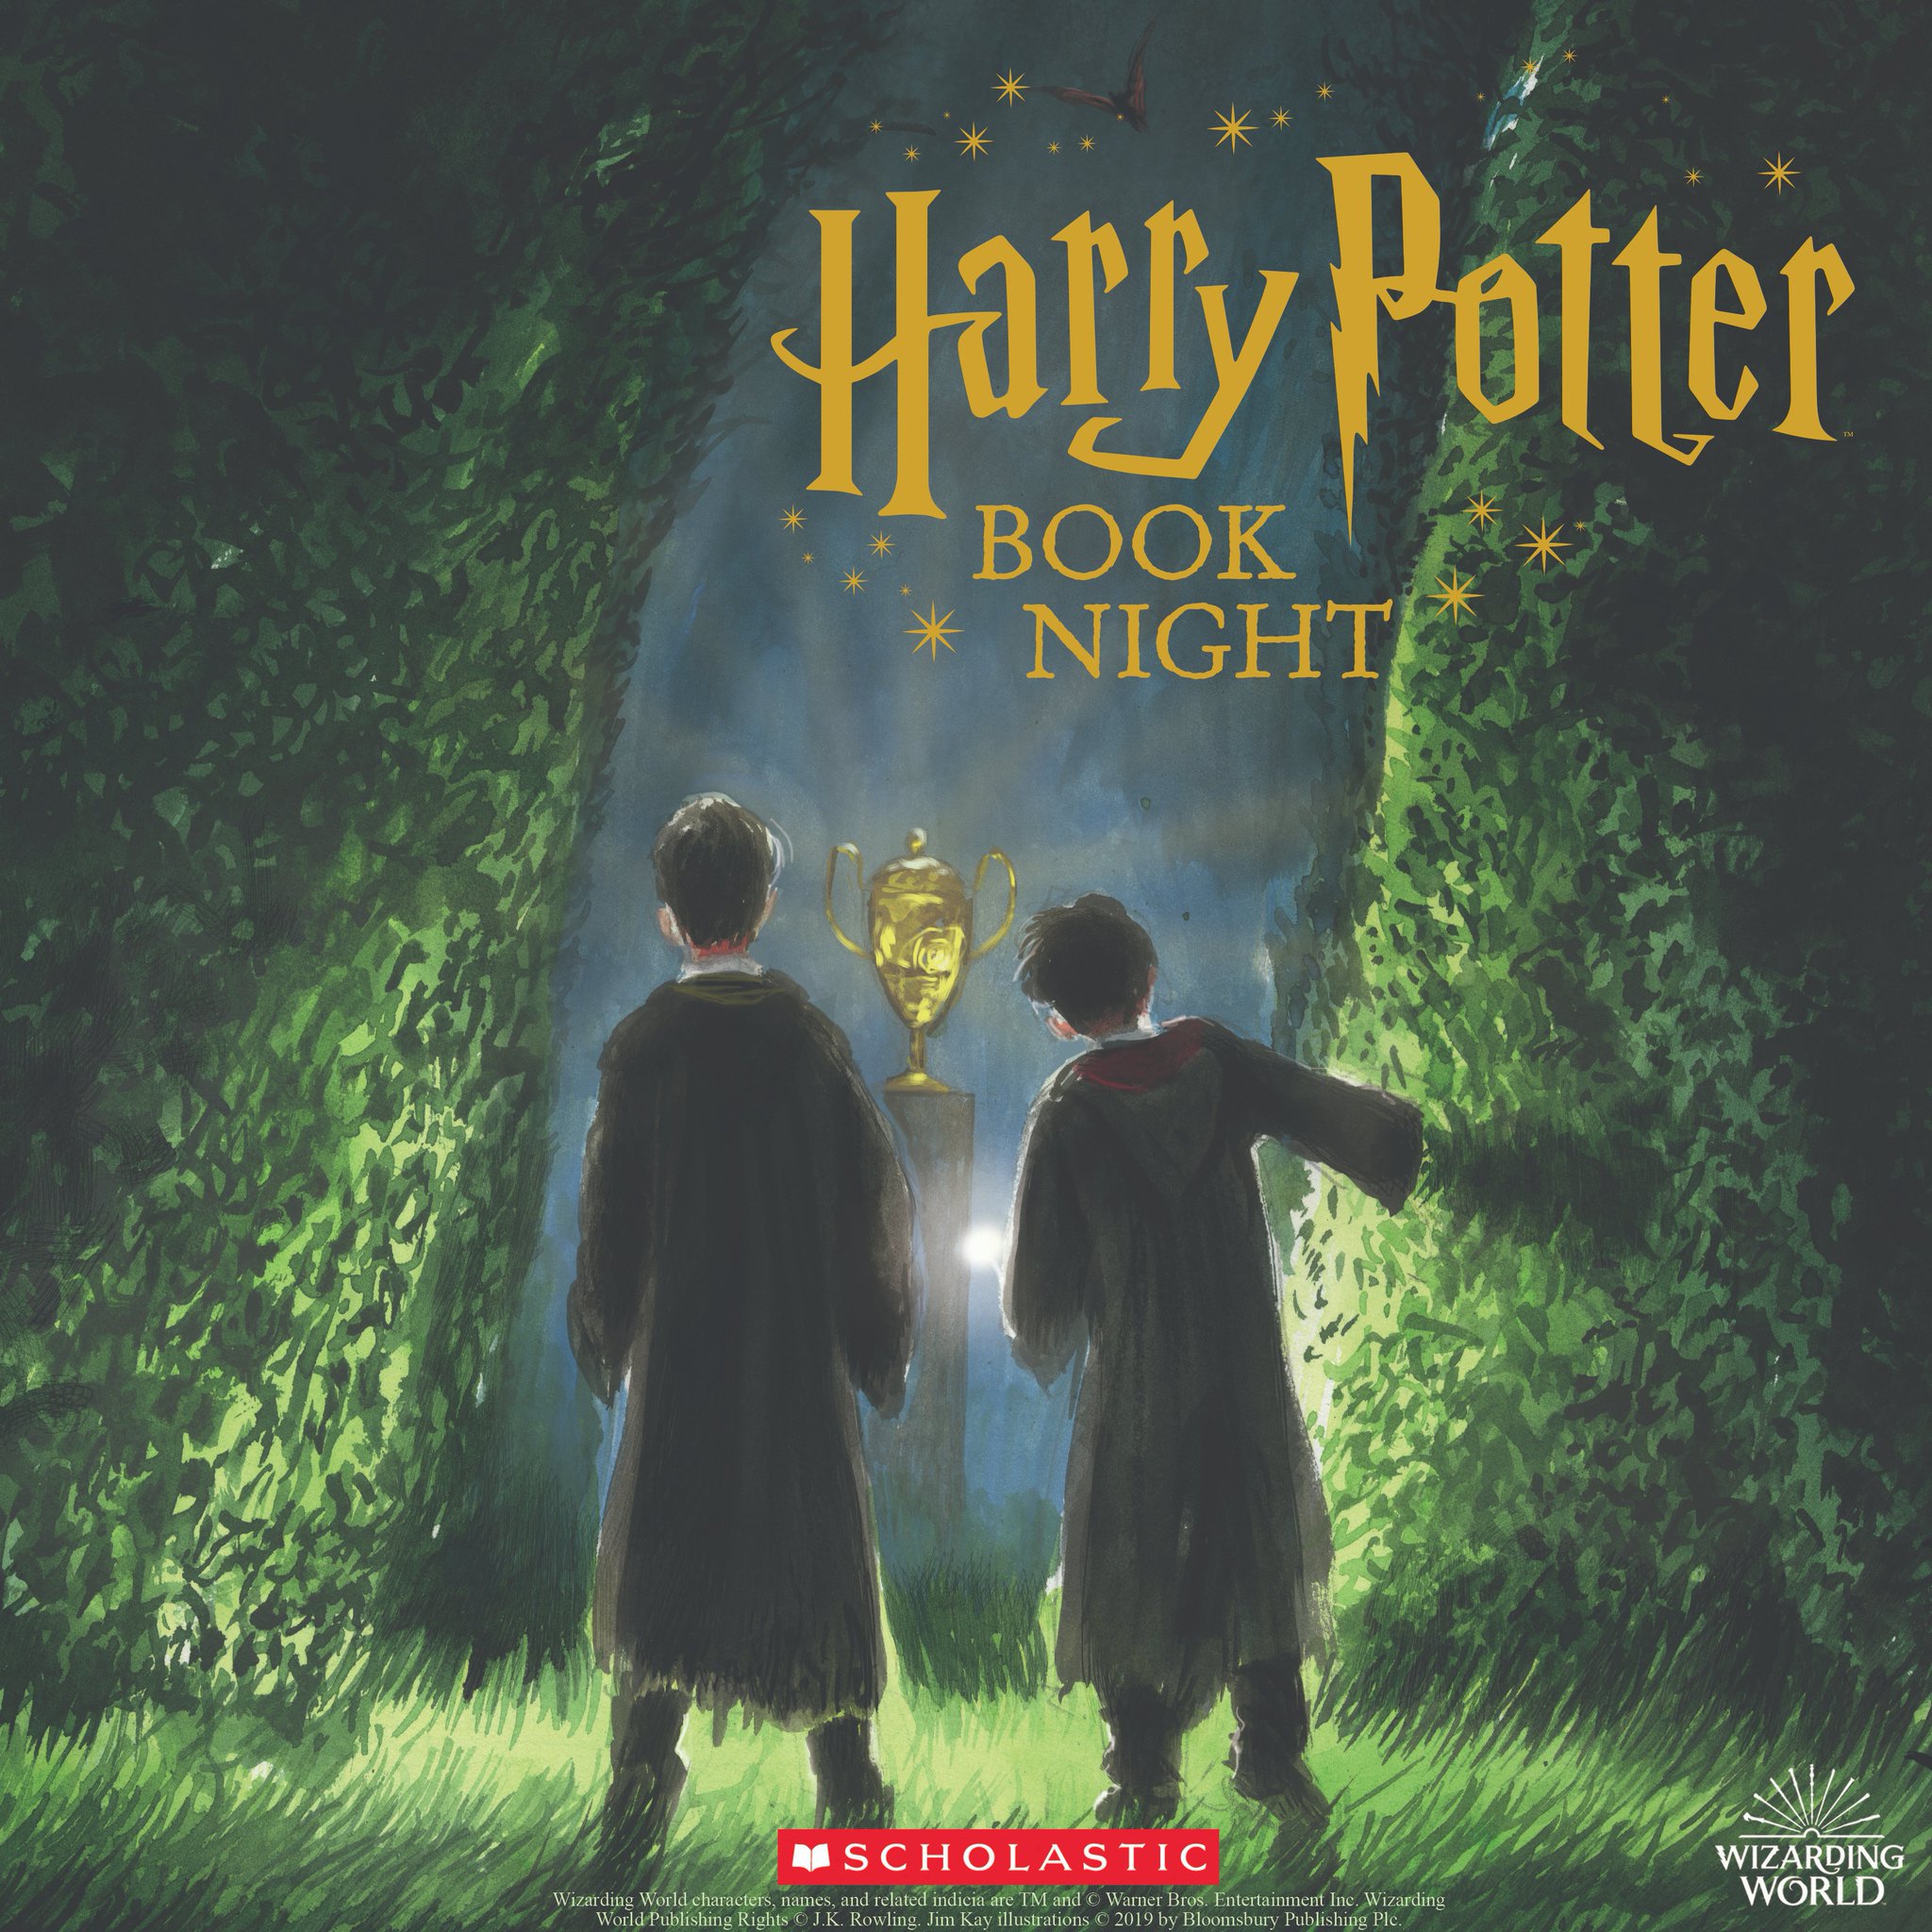 Scholastic - Today's Harry Potter holiday giveaway is a set of